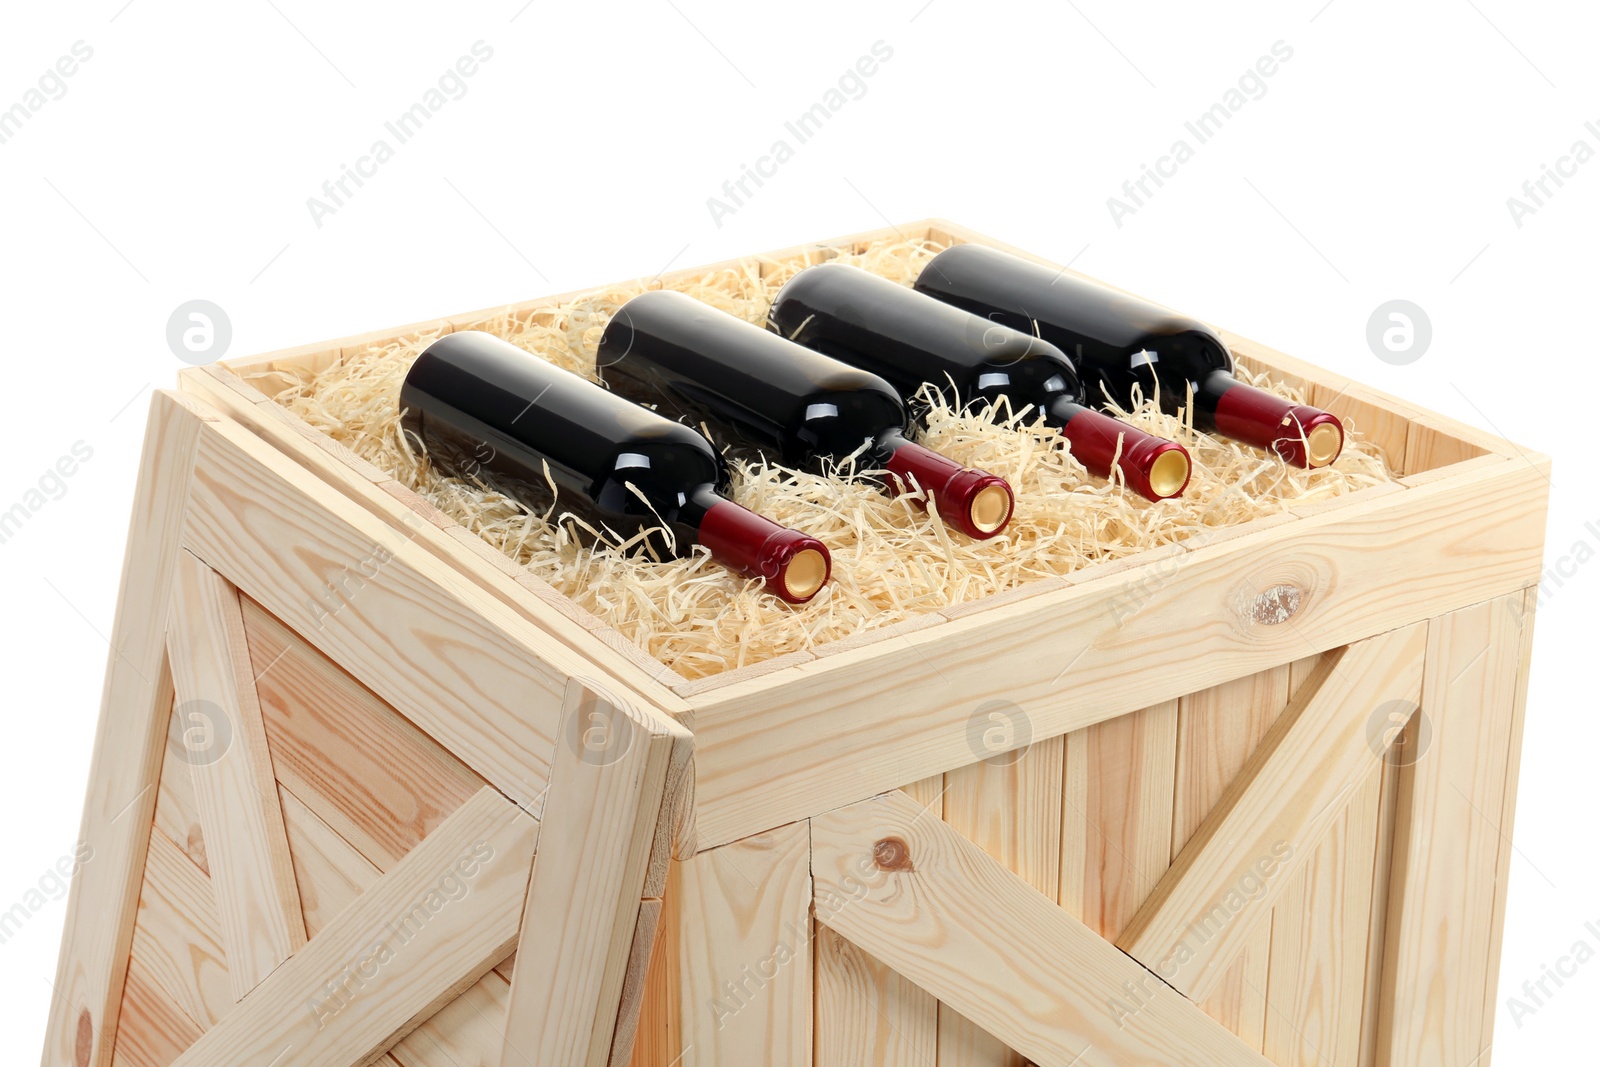 Photo of Bottles of wine in open wooden crate isolated on white